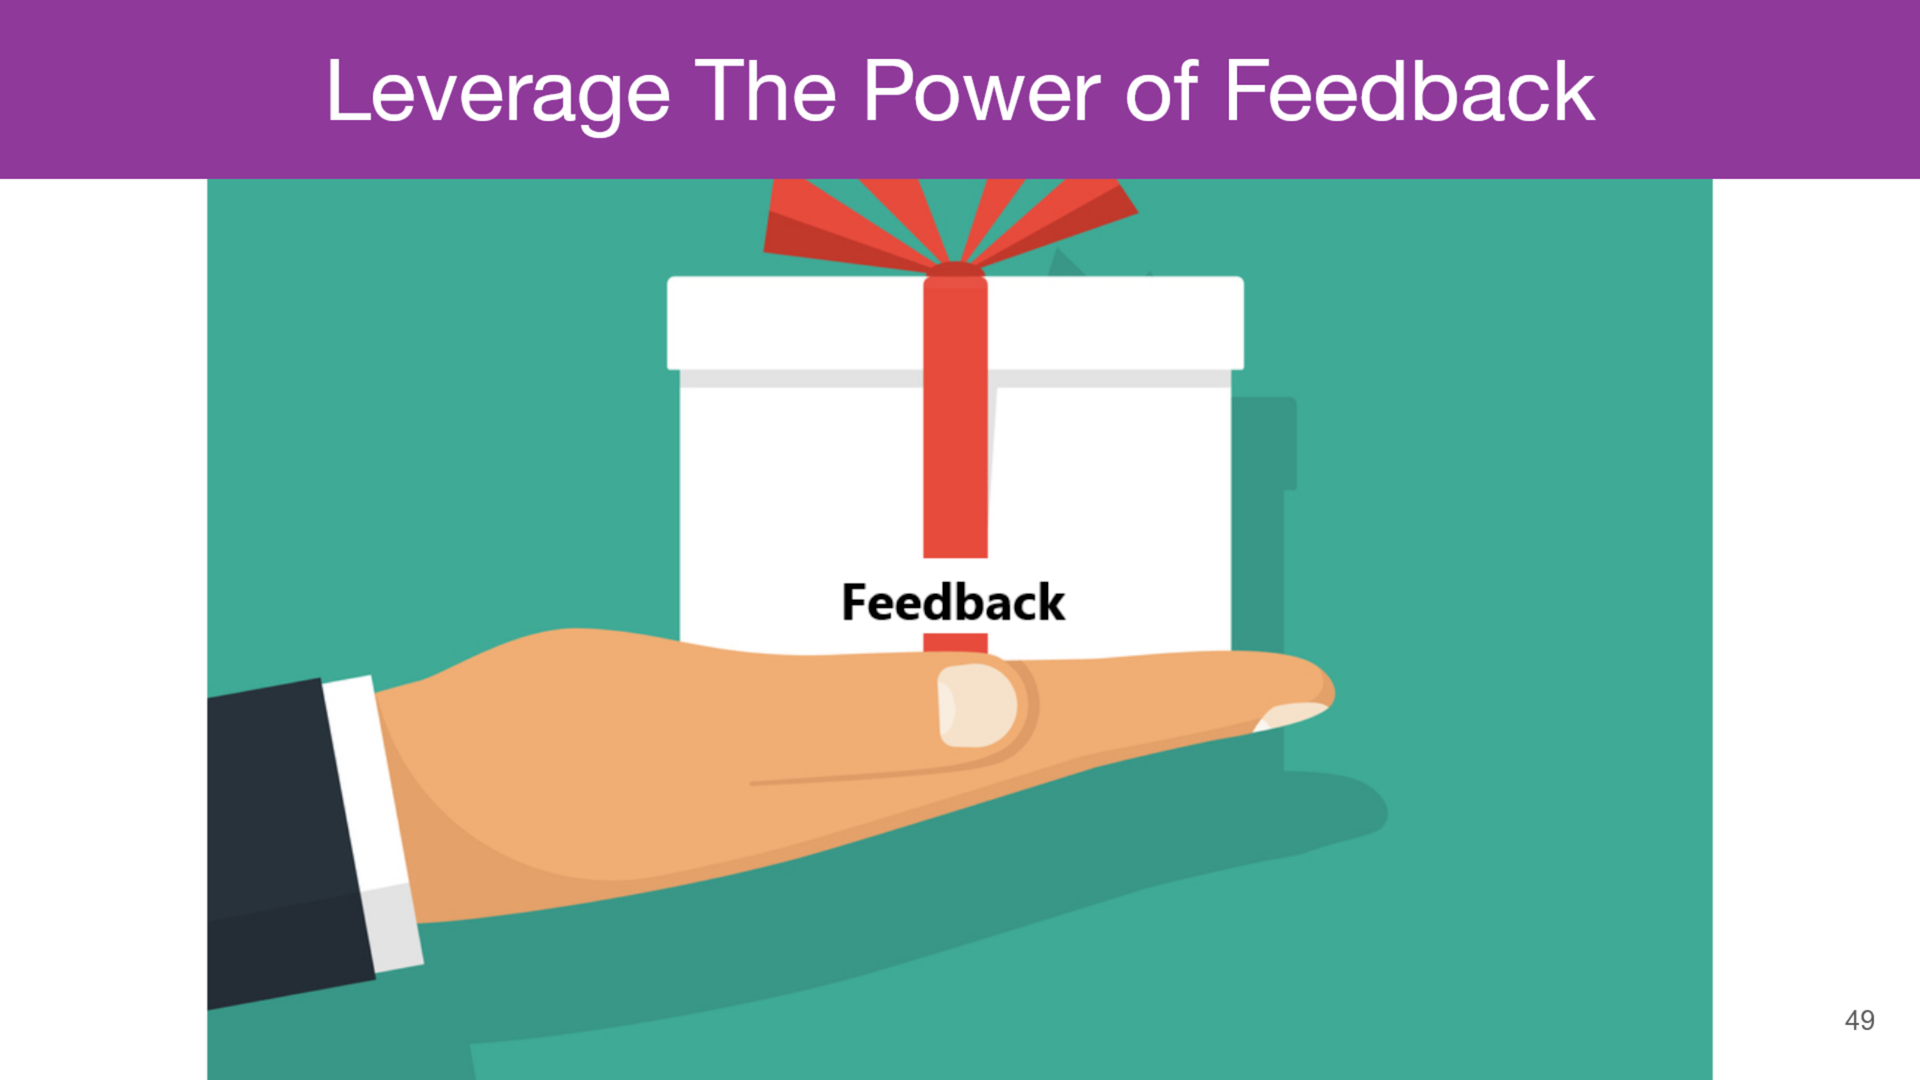 How To Be An Effective Tech Lead [Part 13] - Leverage The Power Of Feedback